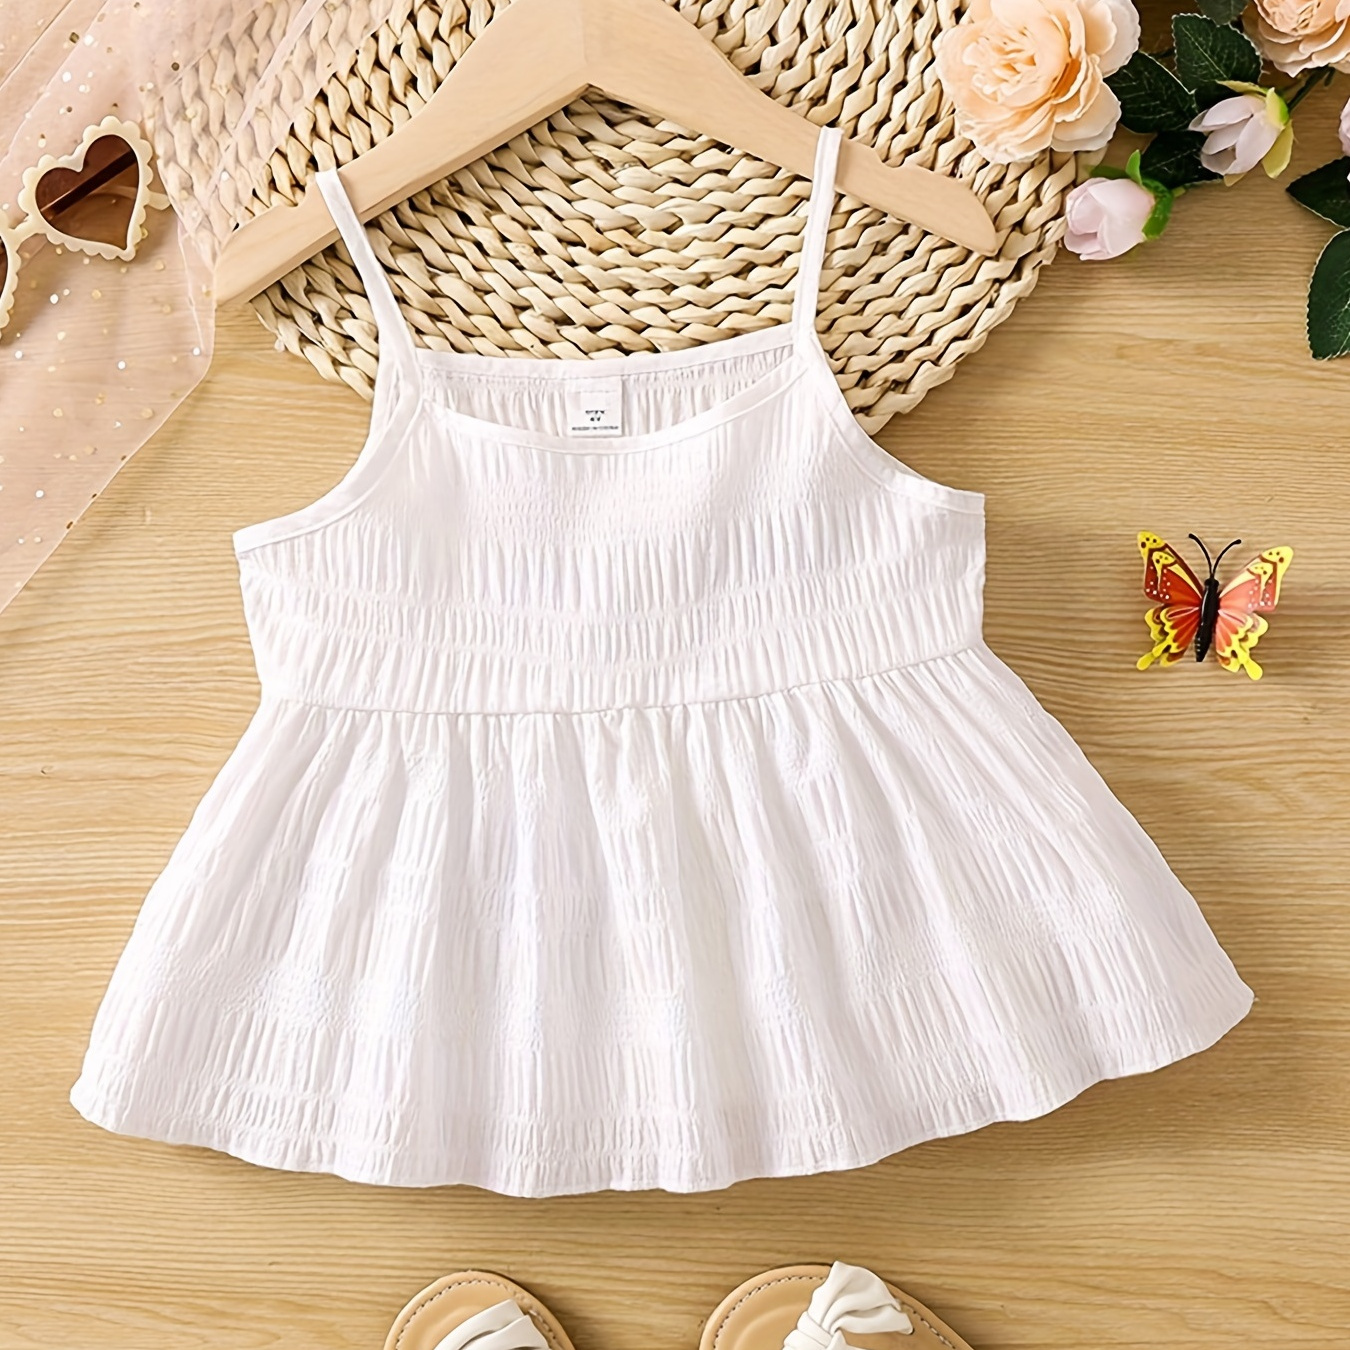 2pcs Toddler Girls Stylish Ruffle Camisole Crop Top & Floral Mesh Puff  Skirt Set, Babies Kids Summer Cute Outfits Clothes